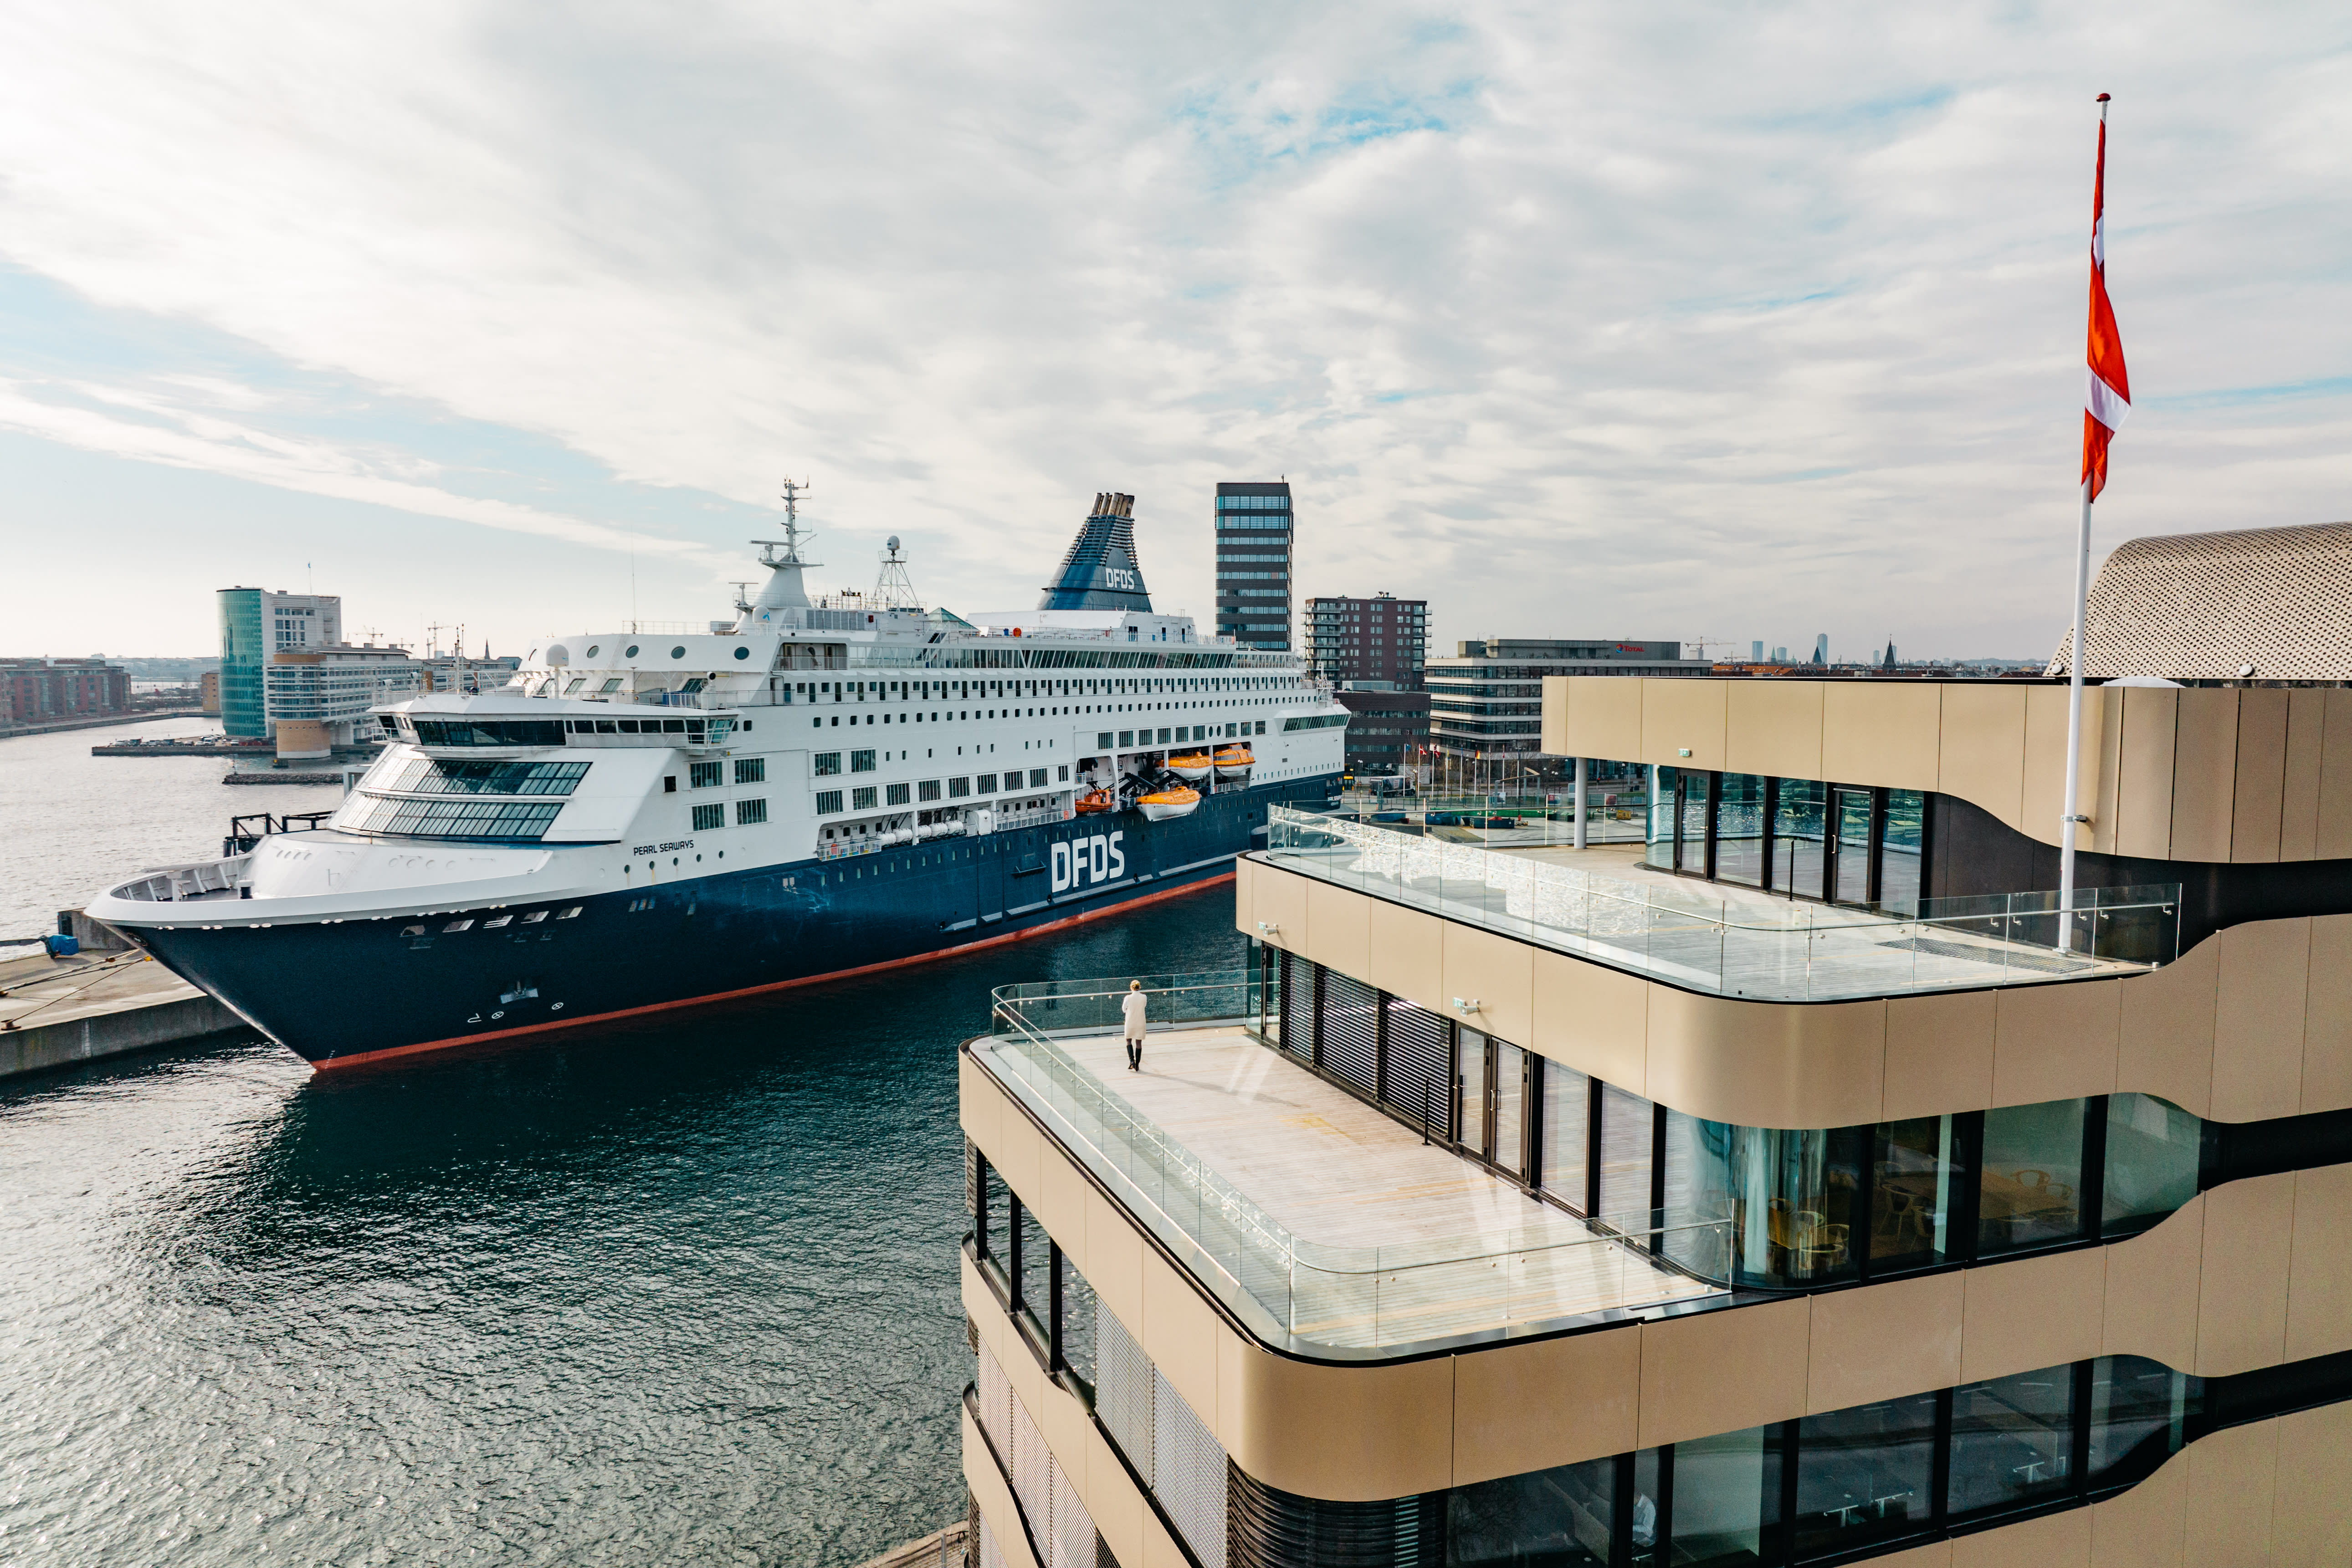 DFDS HQ Drone 03 2022 0257